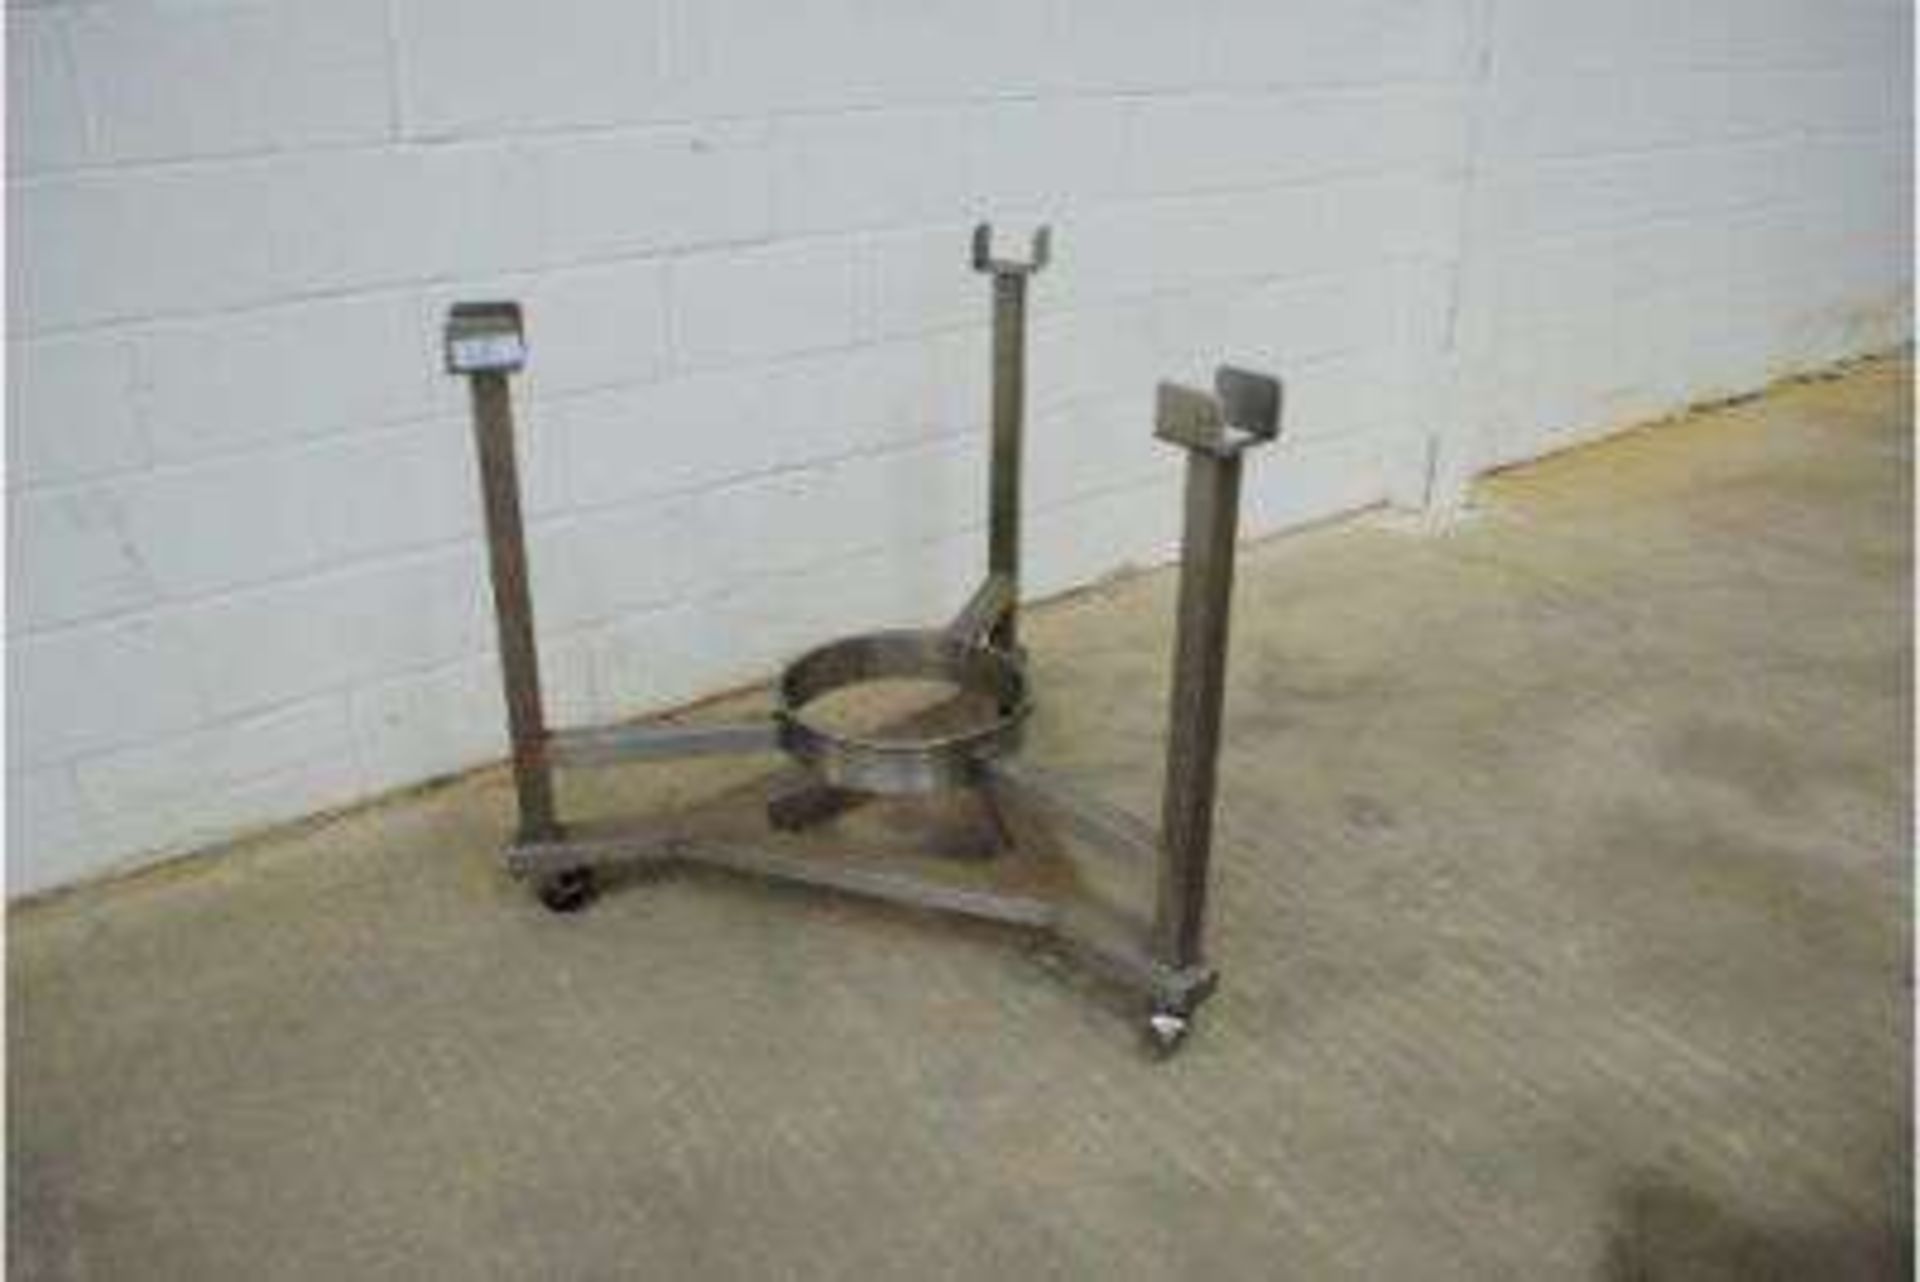 Stainless Steel Frame On Wheels - Image 2 of 3